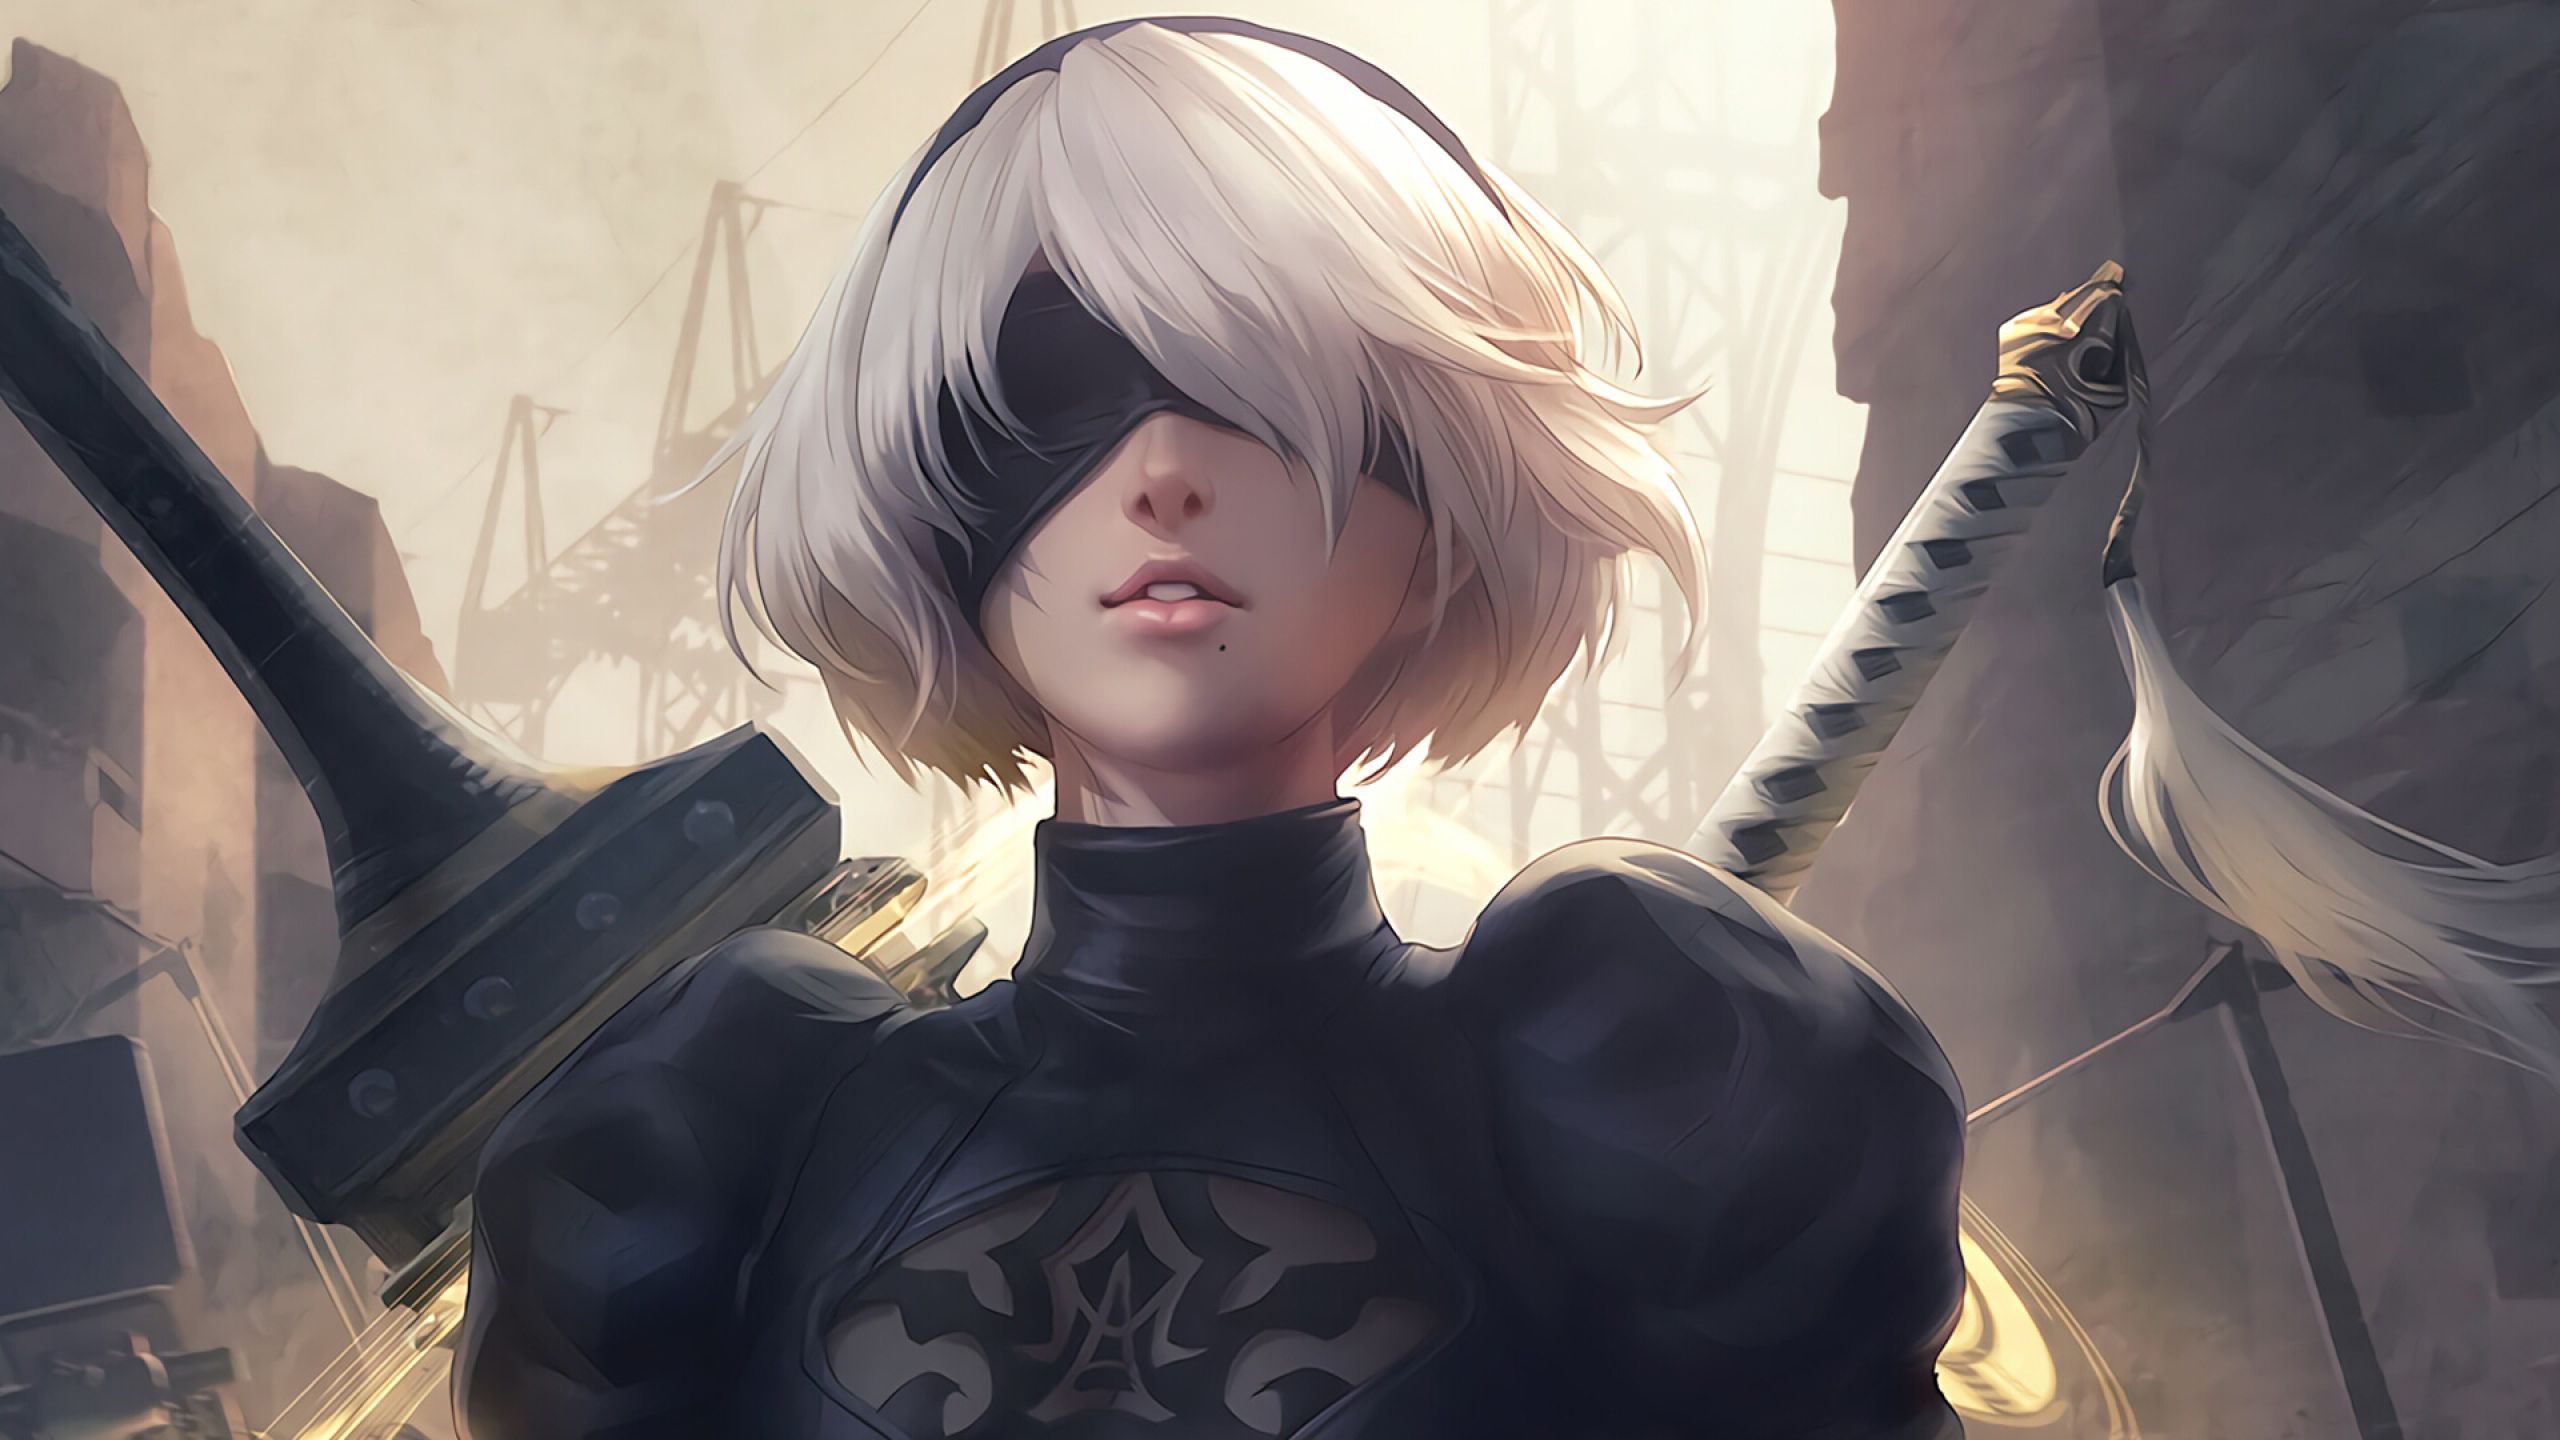 2b Nier Automata 1440P Resolution Wallpaper, HD Anime 4K Wallpaper, Image, Photo and Background